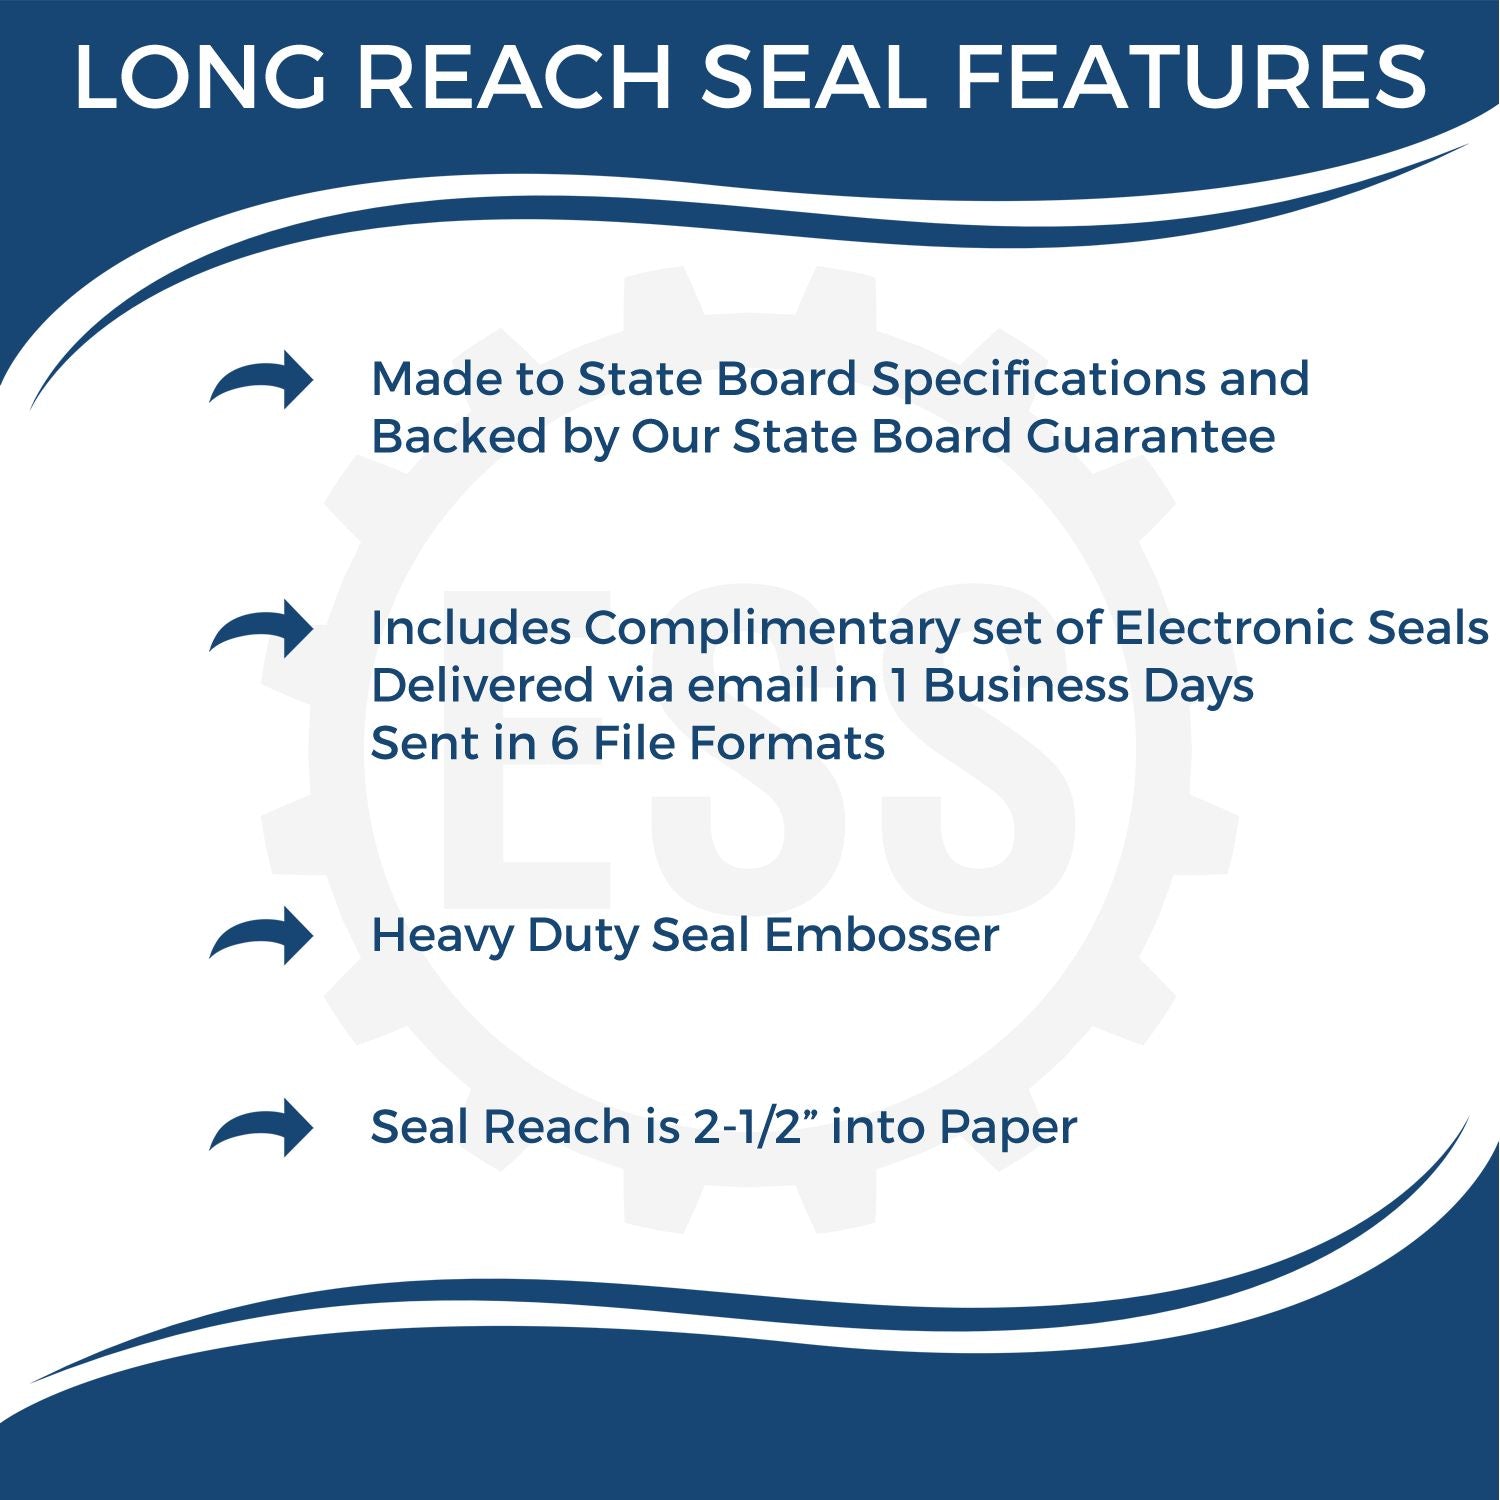 The main image for the Long Reach Louisiana PE Seal depicting a sample of the imprint and electronic files